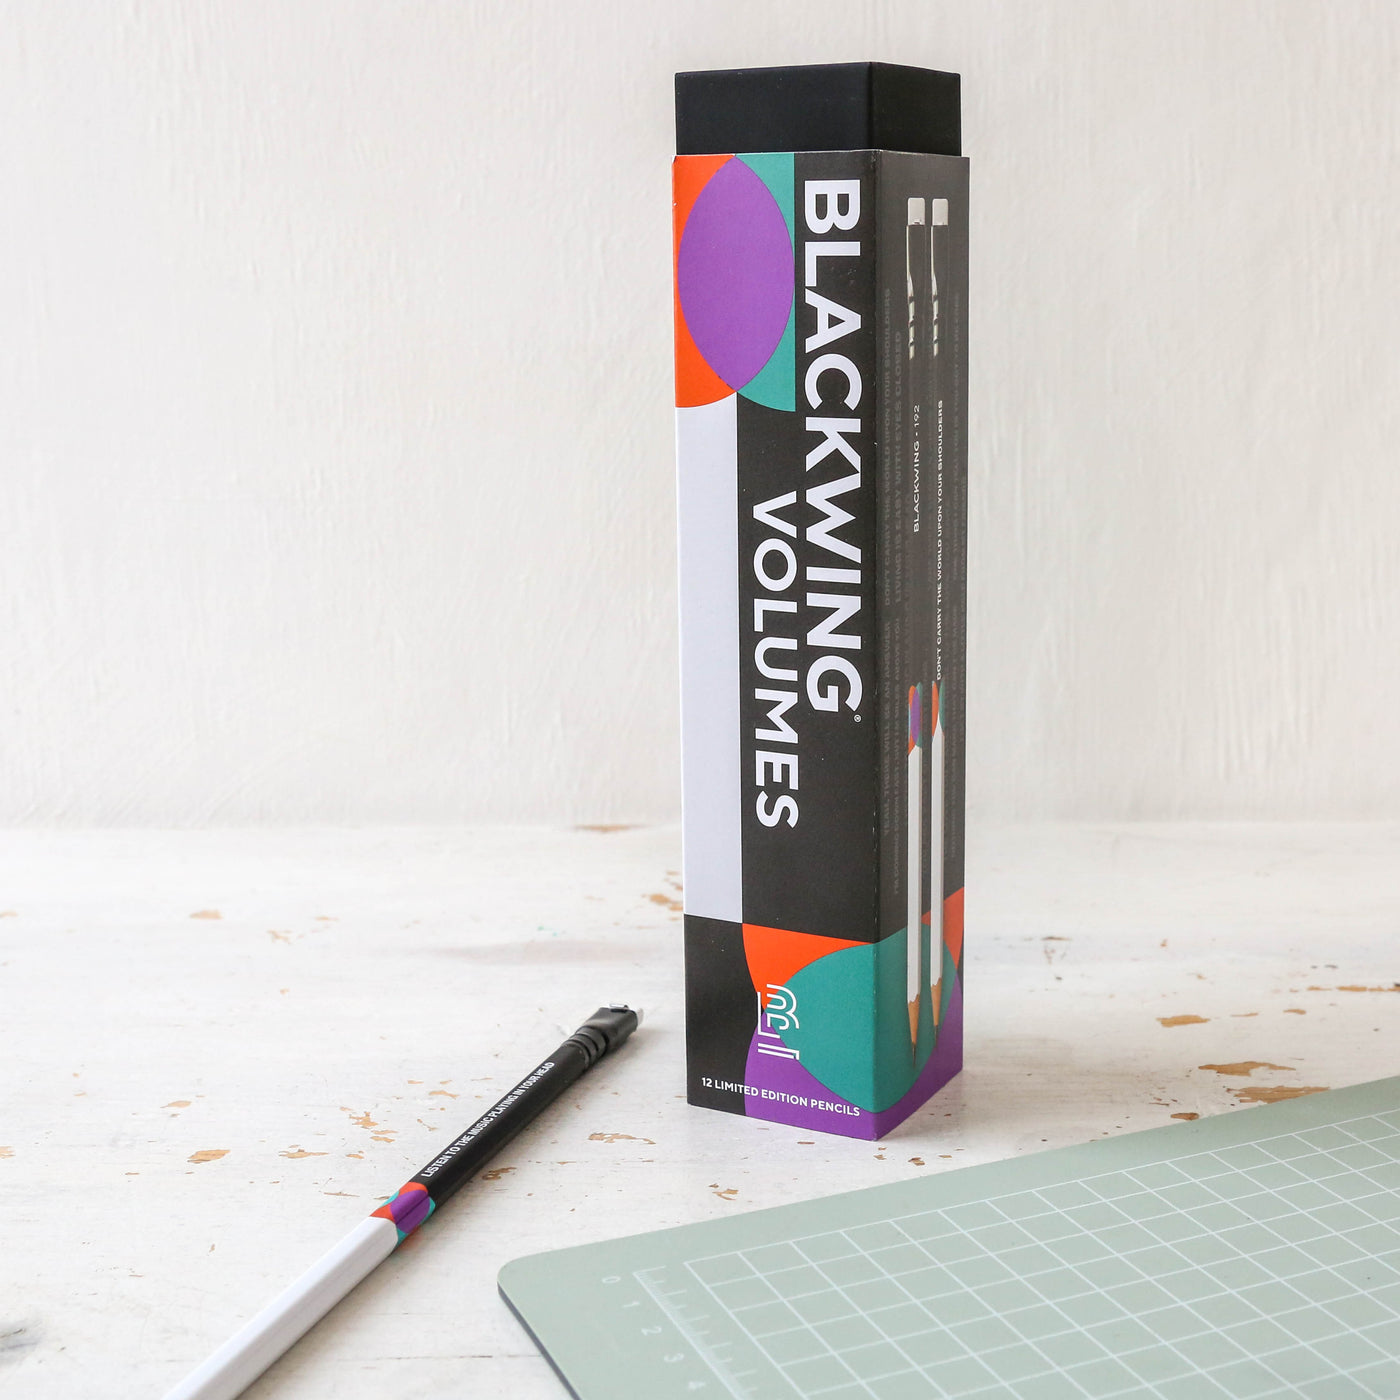 Blackwing Limited Edition Volume 192 - Box of 12 Pencils